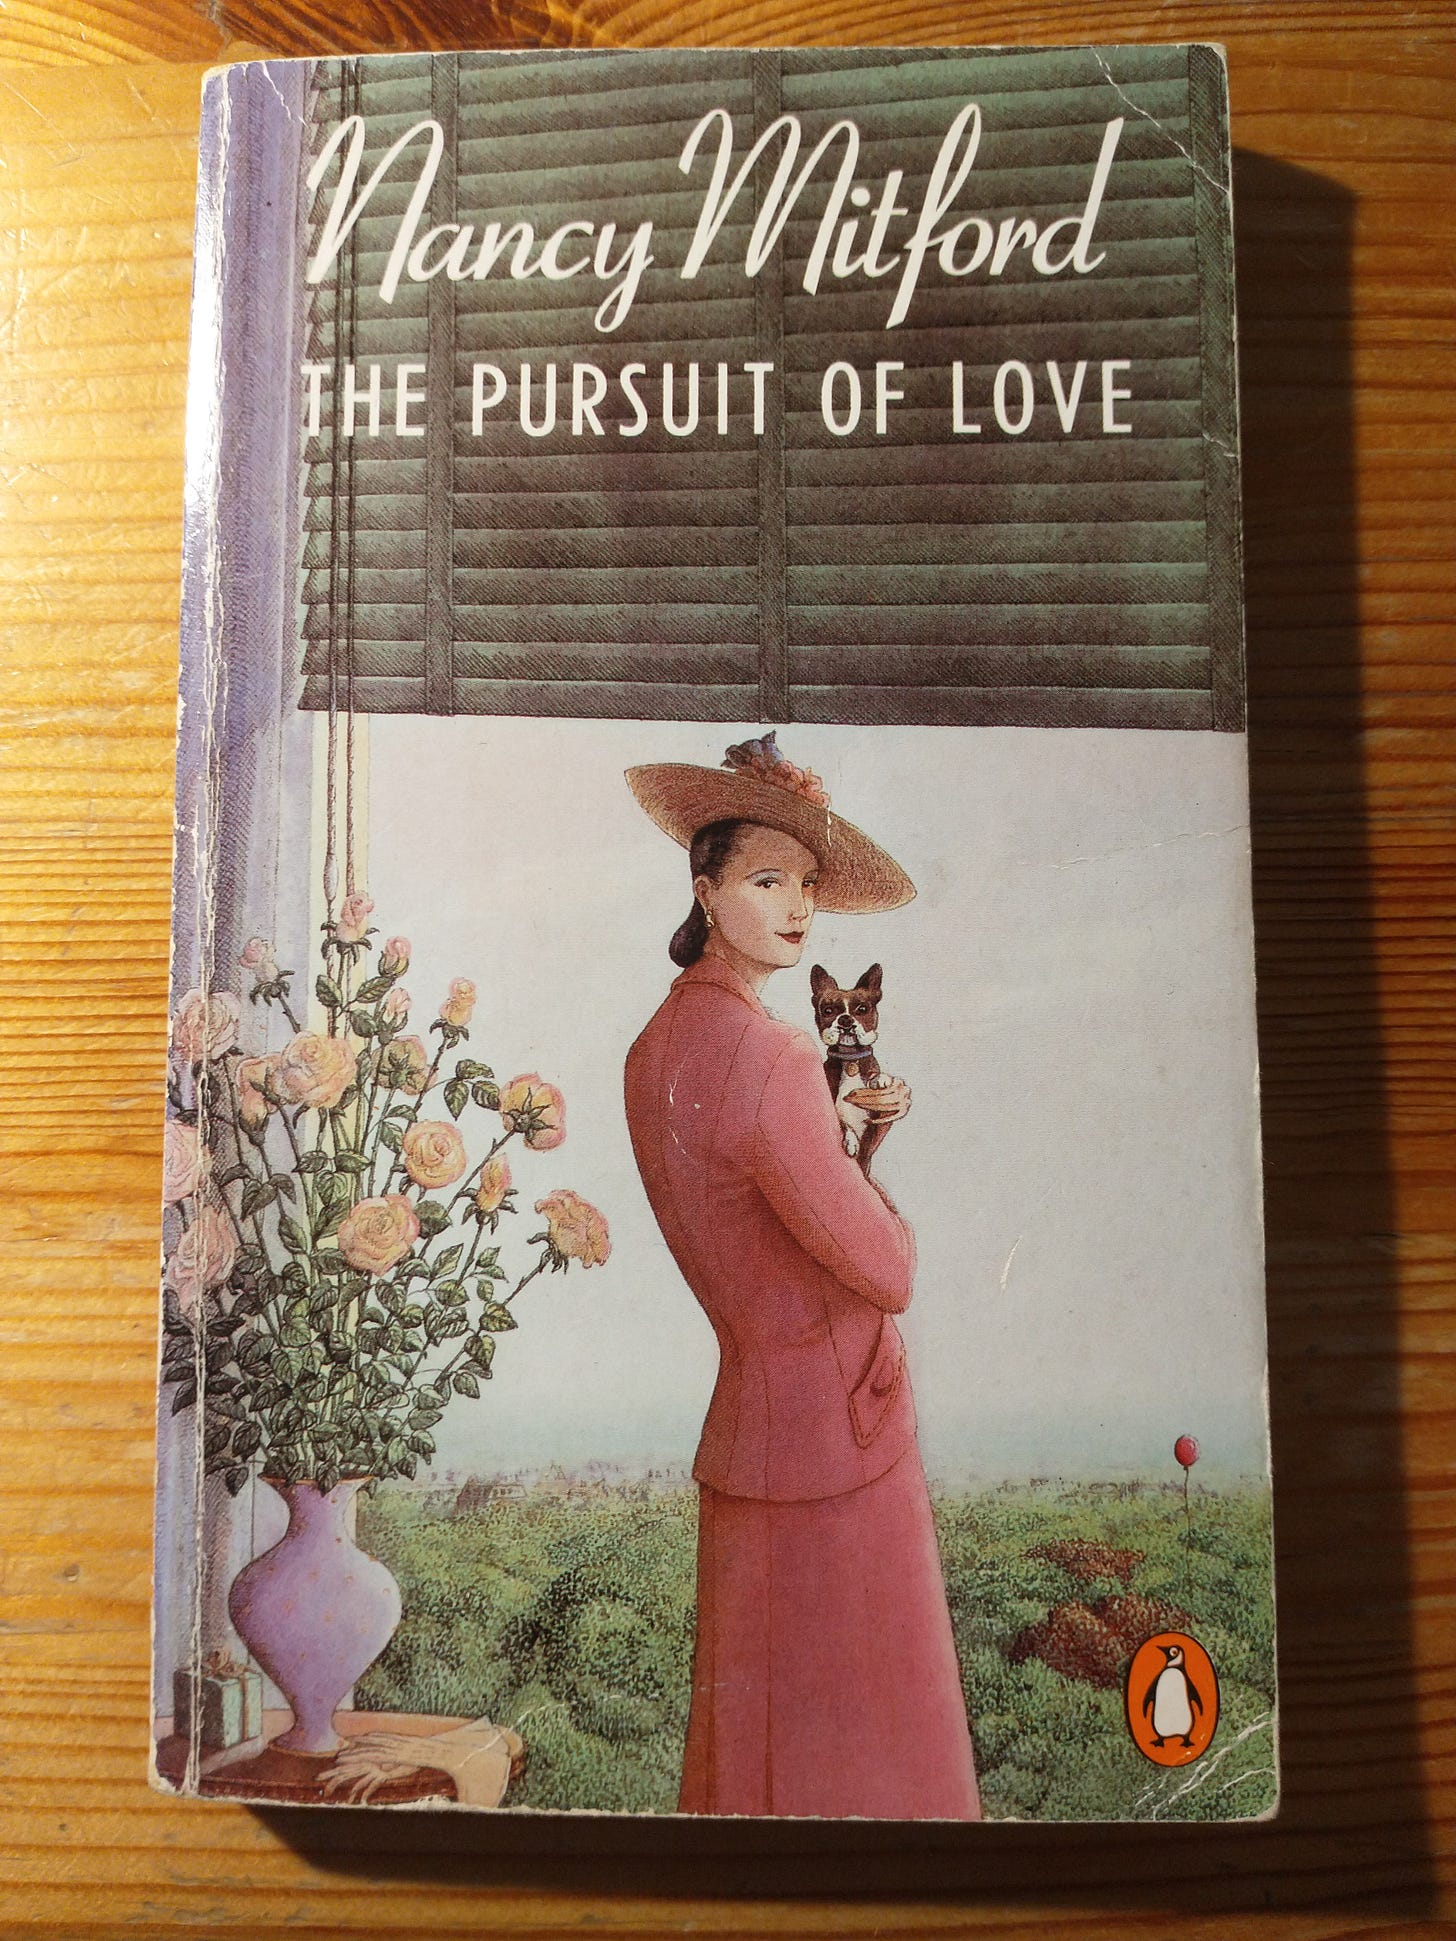 Paperback copy of The Pursuit of Love